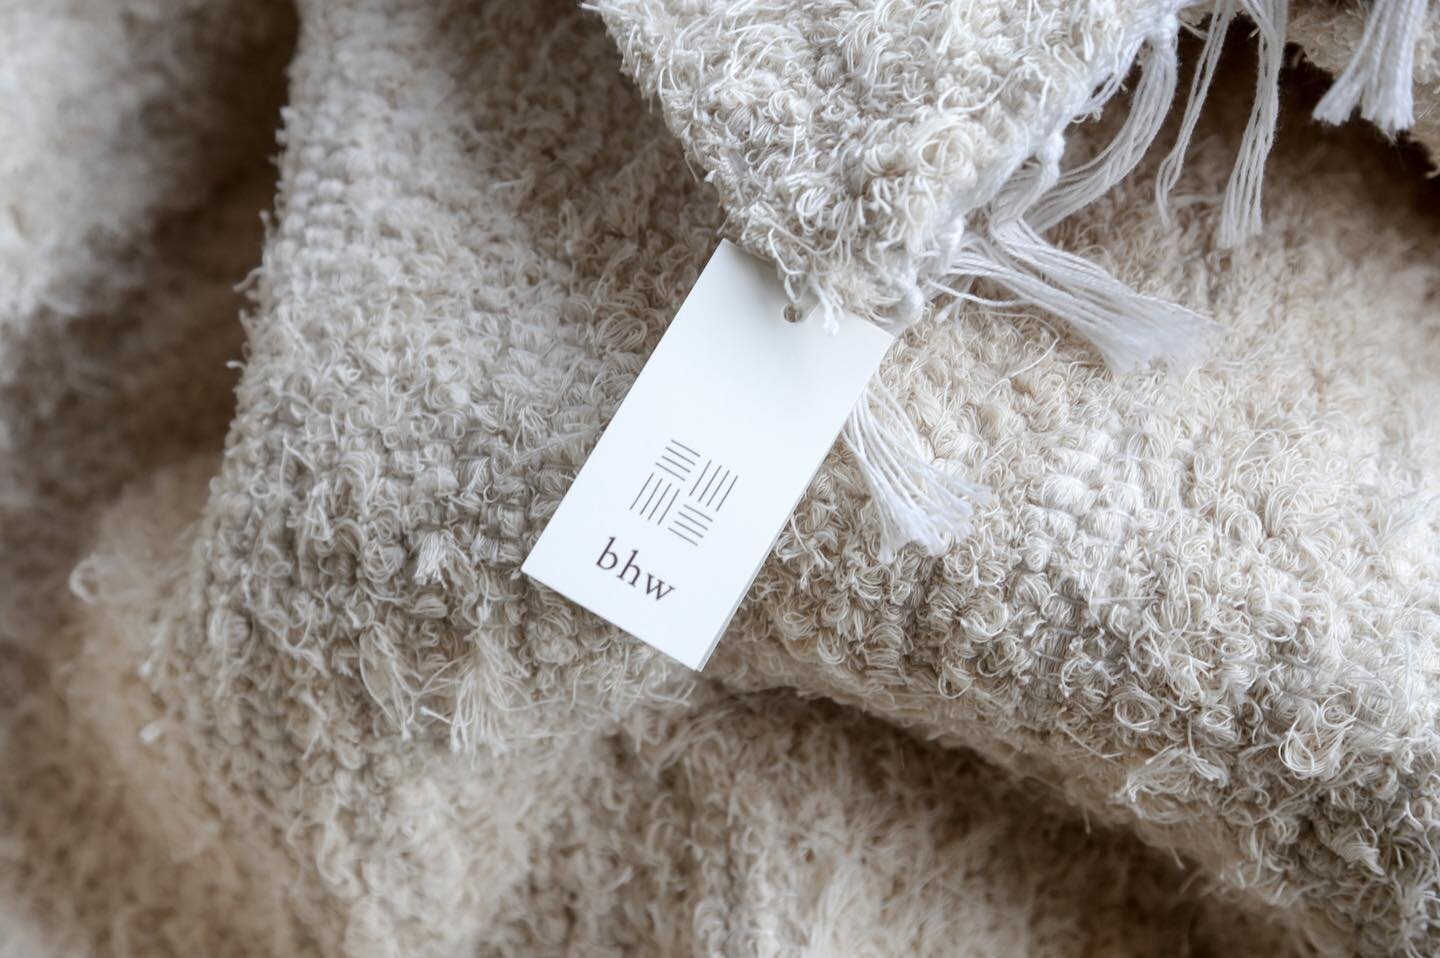 Our beautiful textiles from @barrydale_hand_weavers have arrived! Shop from a selection of towels, blankets, and table linen handwoven from locally grown cotton, in store.
.
.
📷:@chantelclark